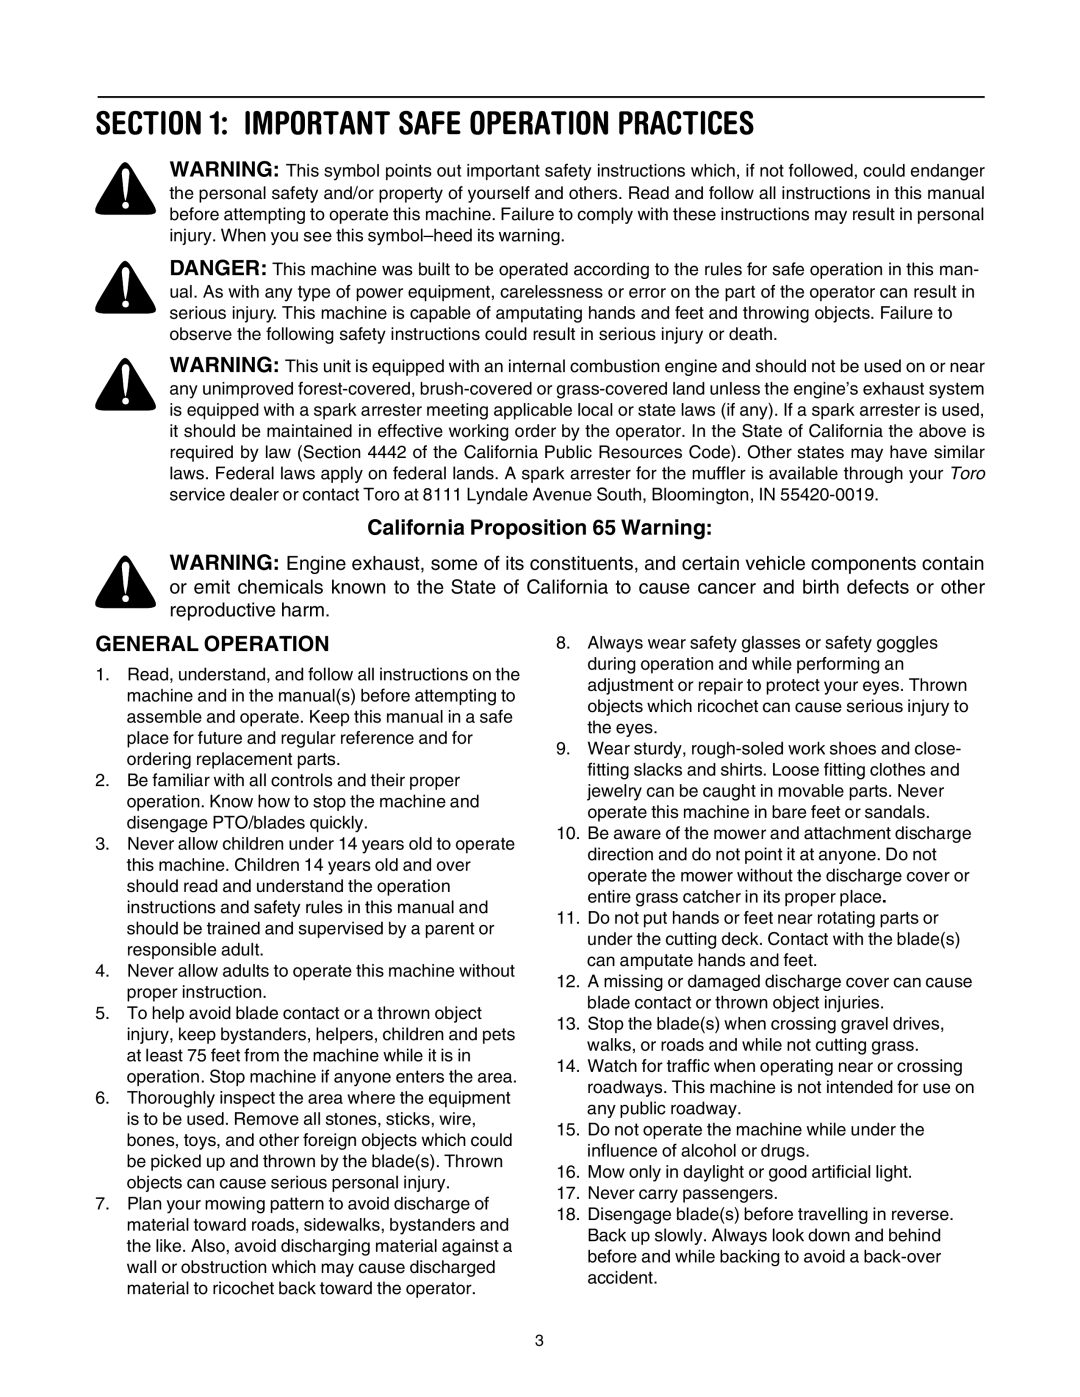 Toro 14AK81RK744, 14AQ81RP744 Important Safe Operation Practices, California Proposition 65 Warning, General Operation 